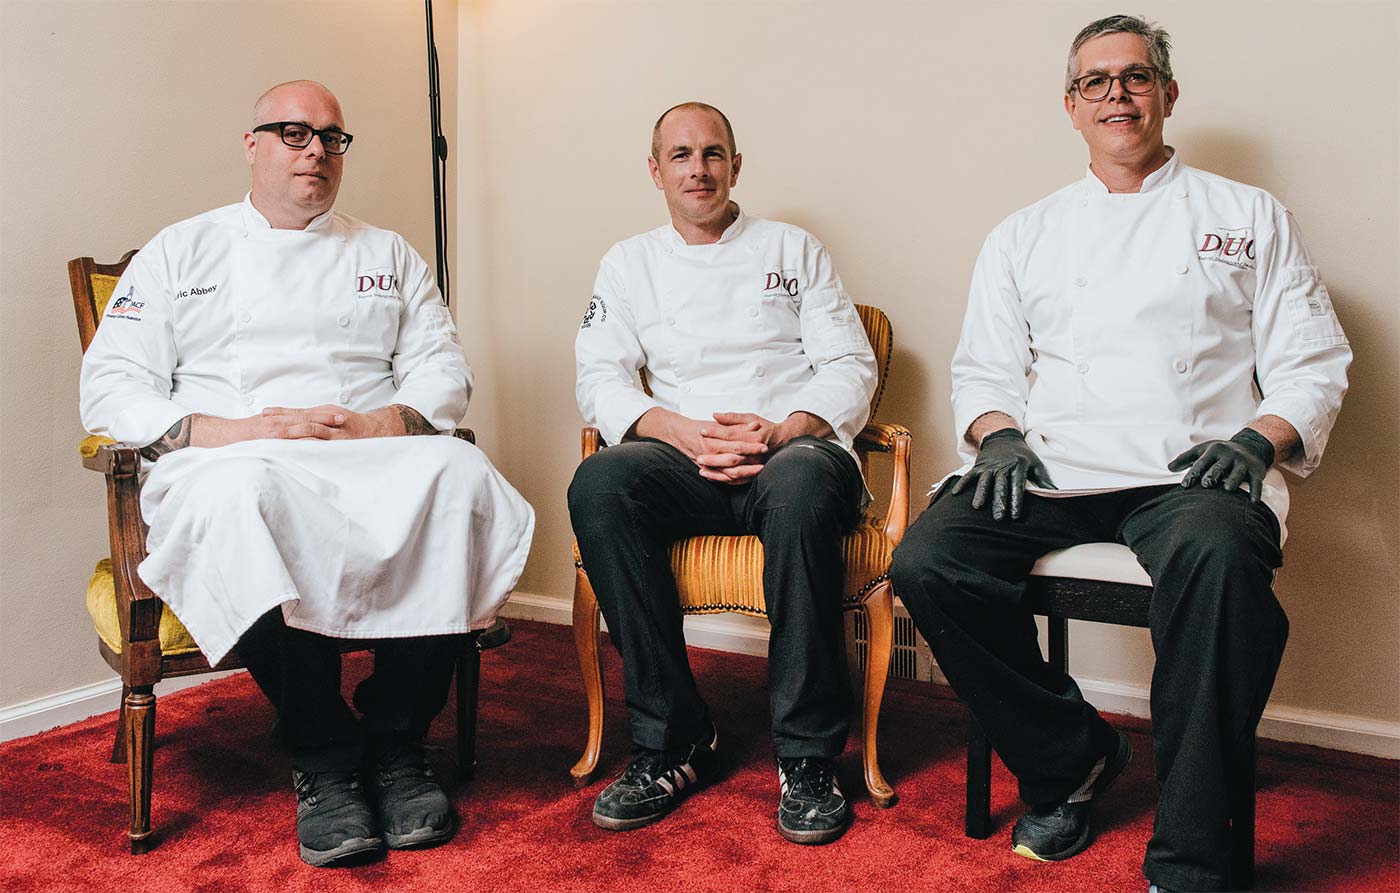 Eric Abbey, Chef Jeremy Abbey and Chef John Piazza